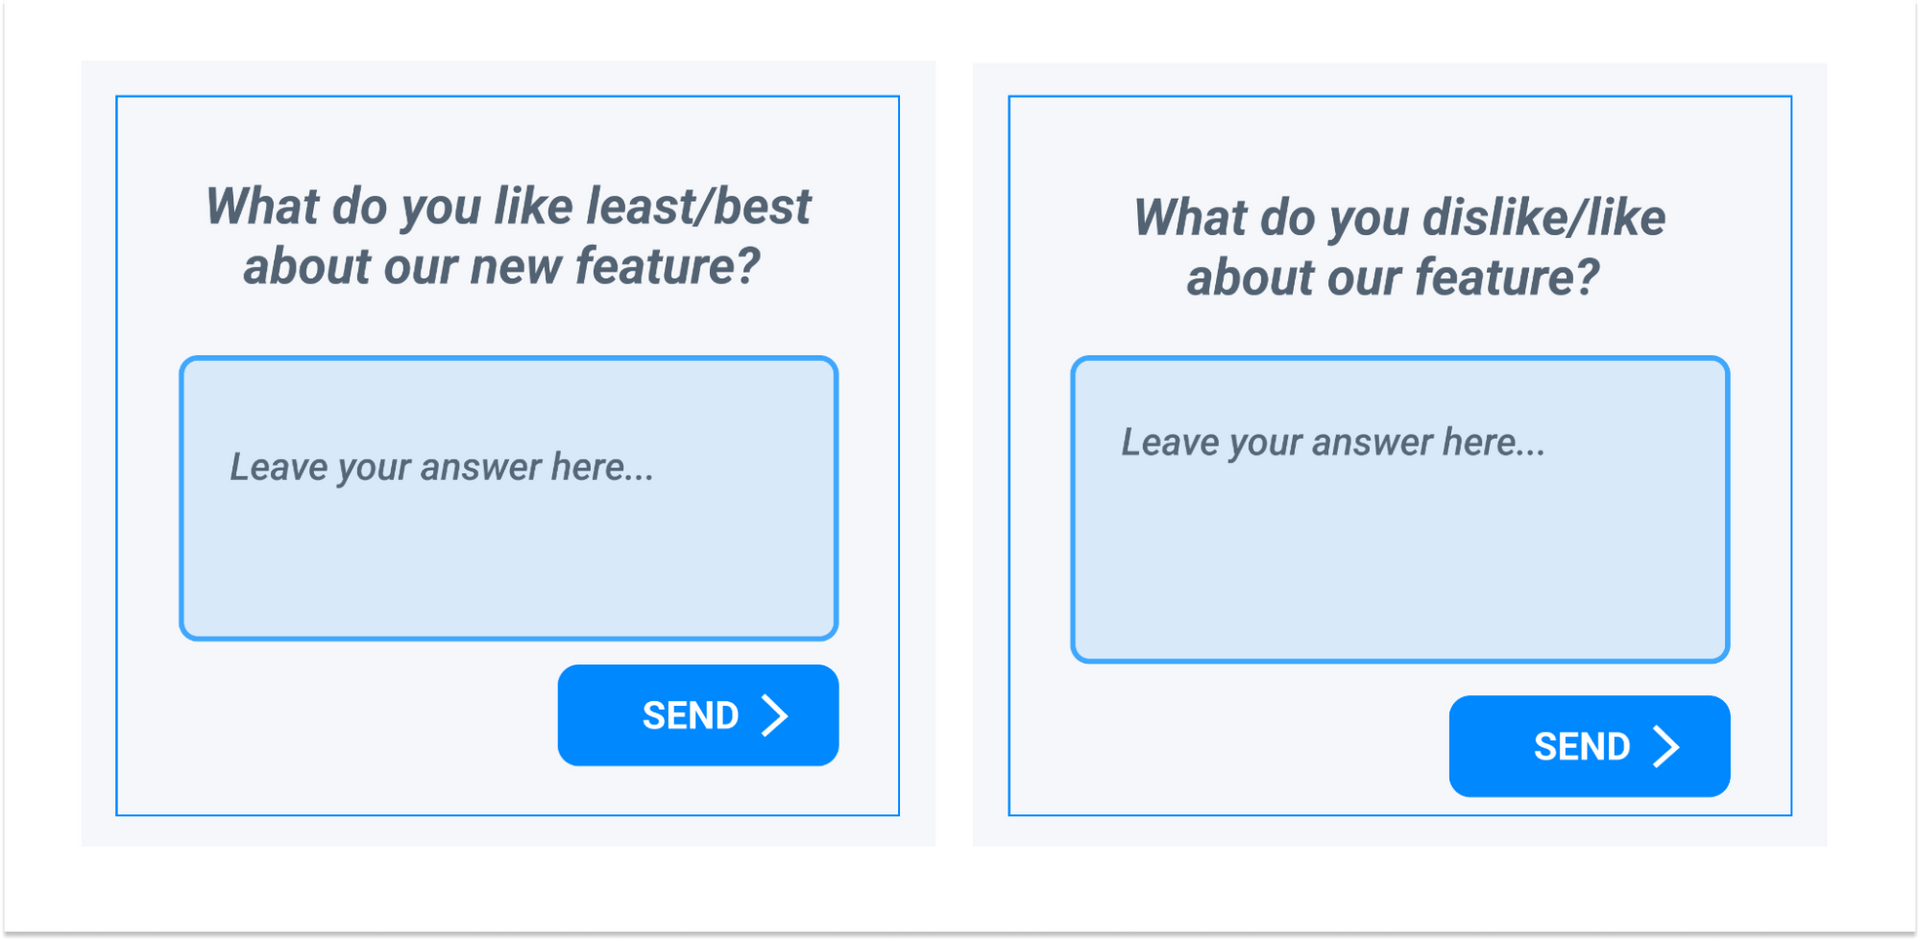 Polar question examples: What do you like the least/best about our new feature? 
What do you dislike/like about our feature?